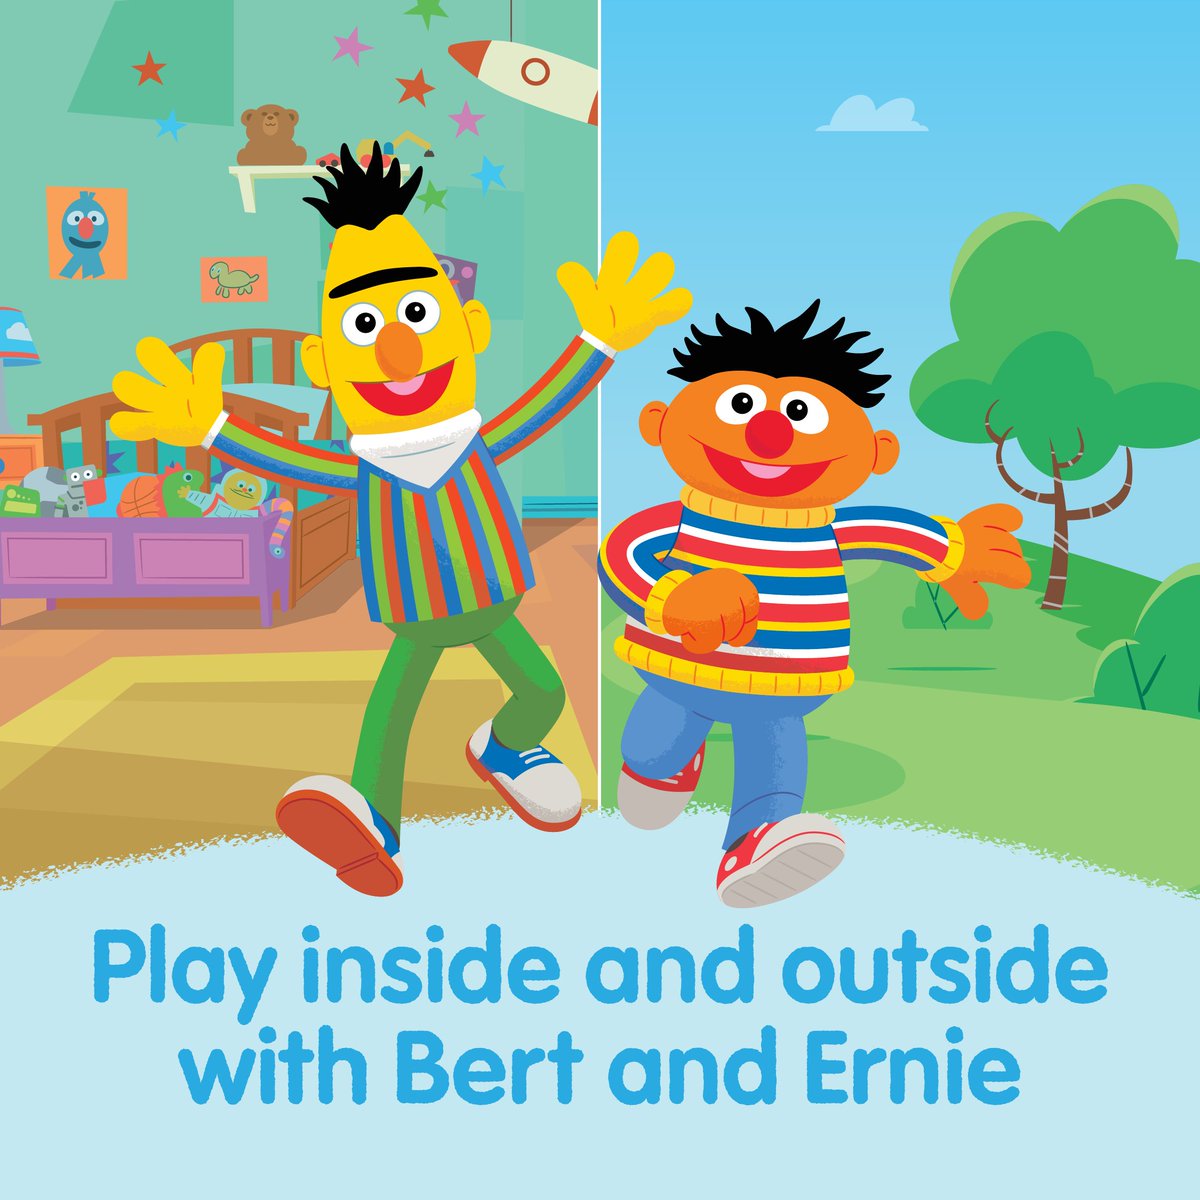 Playing educational games can help children develop the skills they need in school and life. With the help of @BertSesame and @SesameErnie, children can use their natural curiosity to build reasoning skills in this game. m.sesame.org/insideoutsidetw #Resources